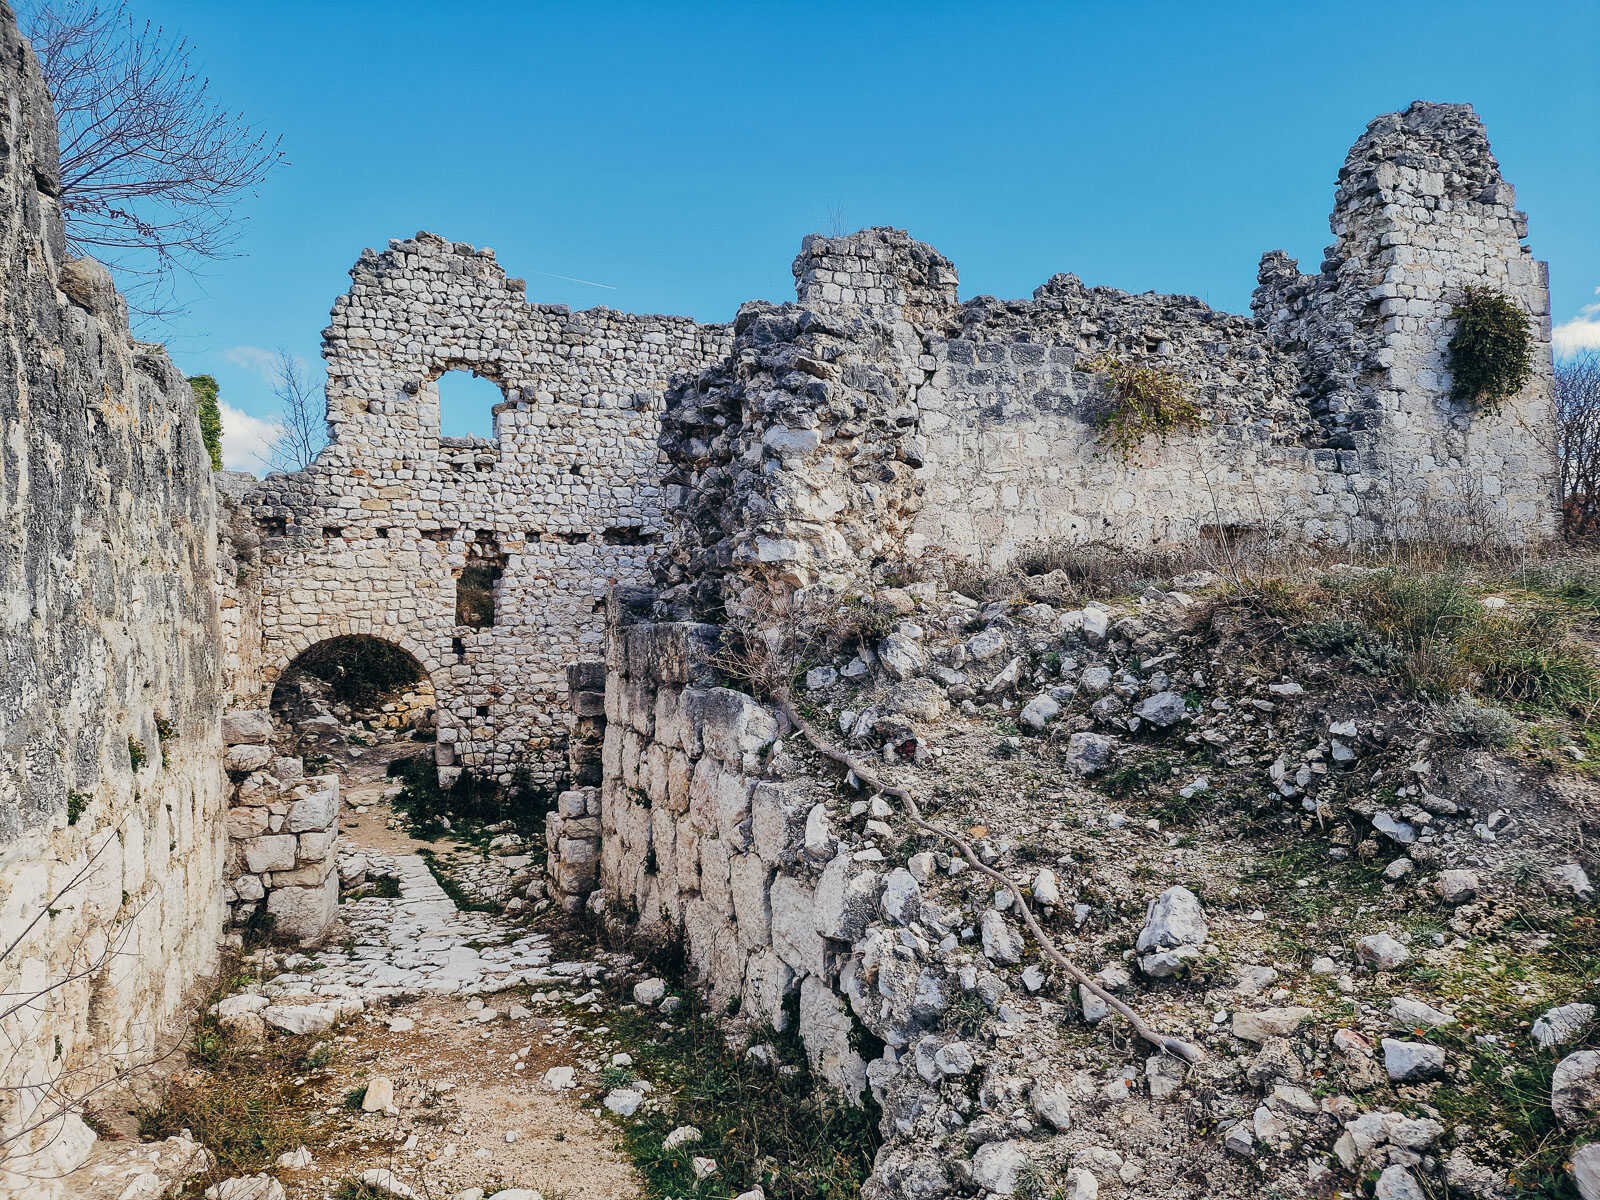 Stone ruins on an old fortress, the stones are white and grass grows in between, the sky is blue through holes where windows used to be, Vrana fortress in Croatia